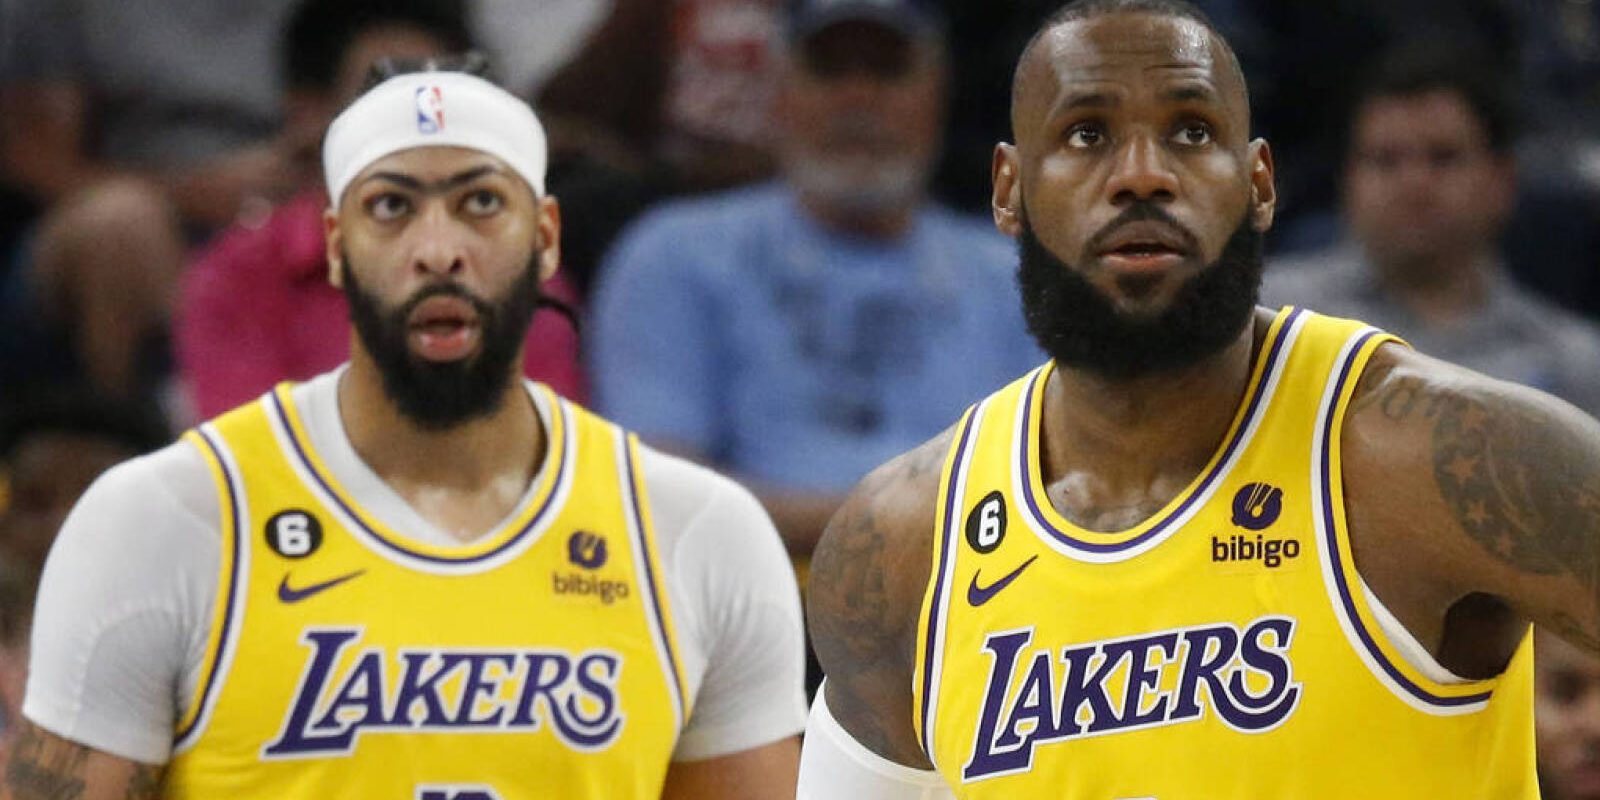 Apr 19, 2023; Memphis, Tennessee, USA; Los Angeles Lakers forward Anthony Davis (3) and forward LeBron James (6) watch during the second half during game two of the 2023 NBA playoffs against the Memphis Grizzlies at FedExForum. Mandatory Credit: Petre Thomas-USA TODAY Sports